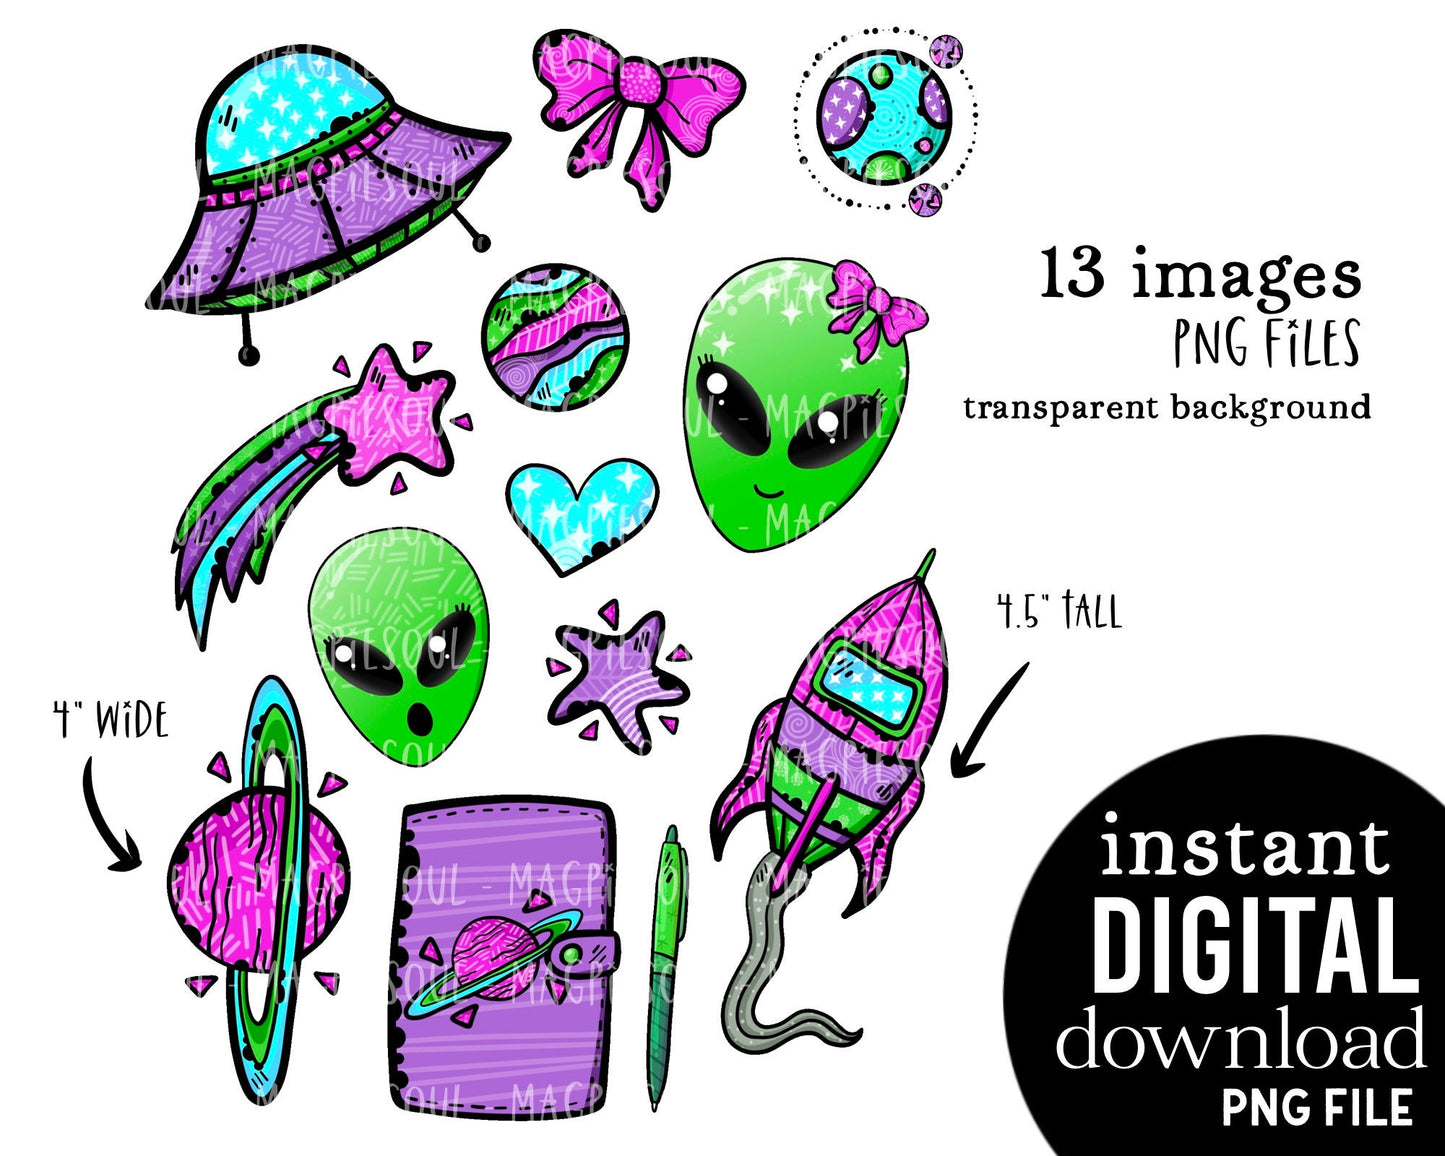 Spaced Out Clipart Bundle